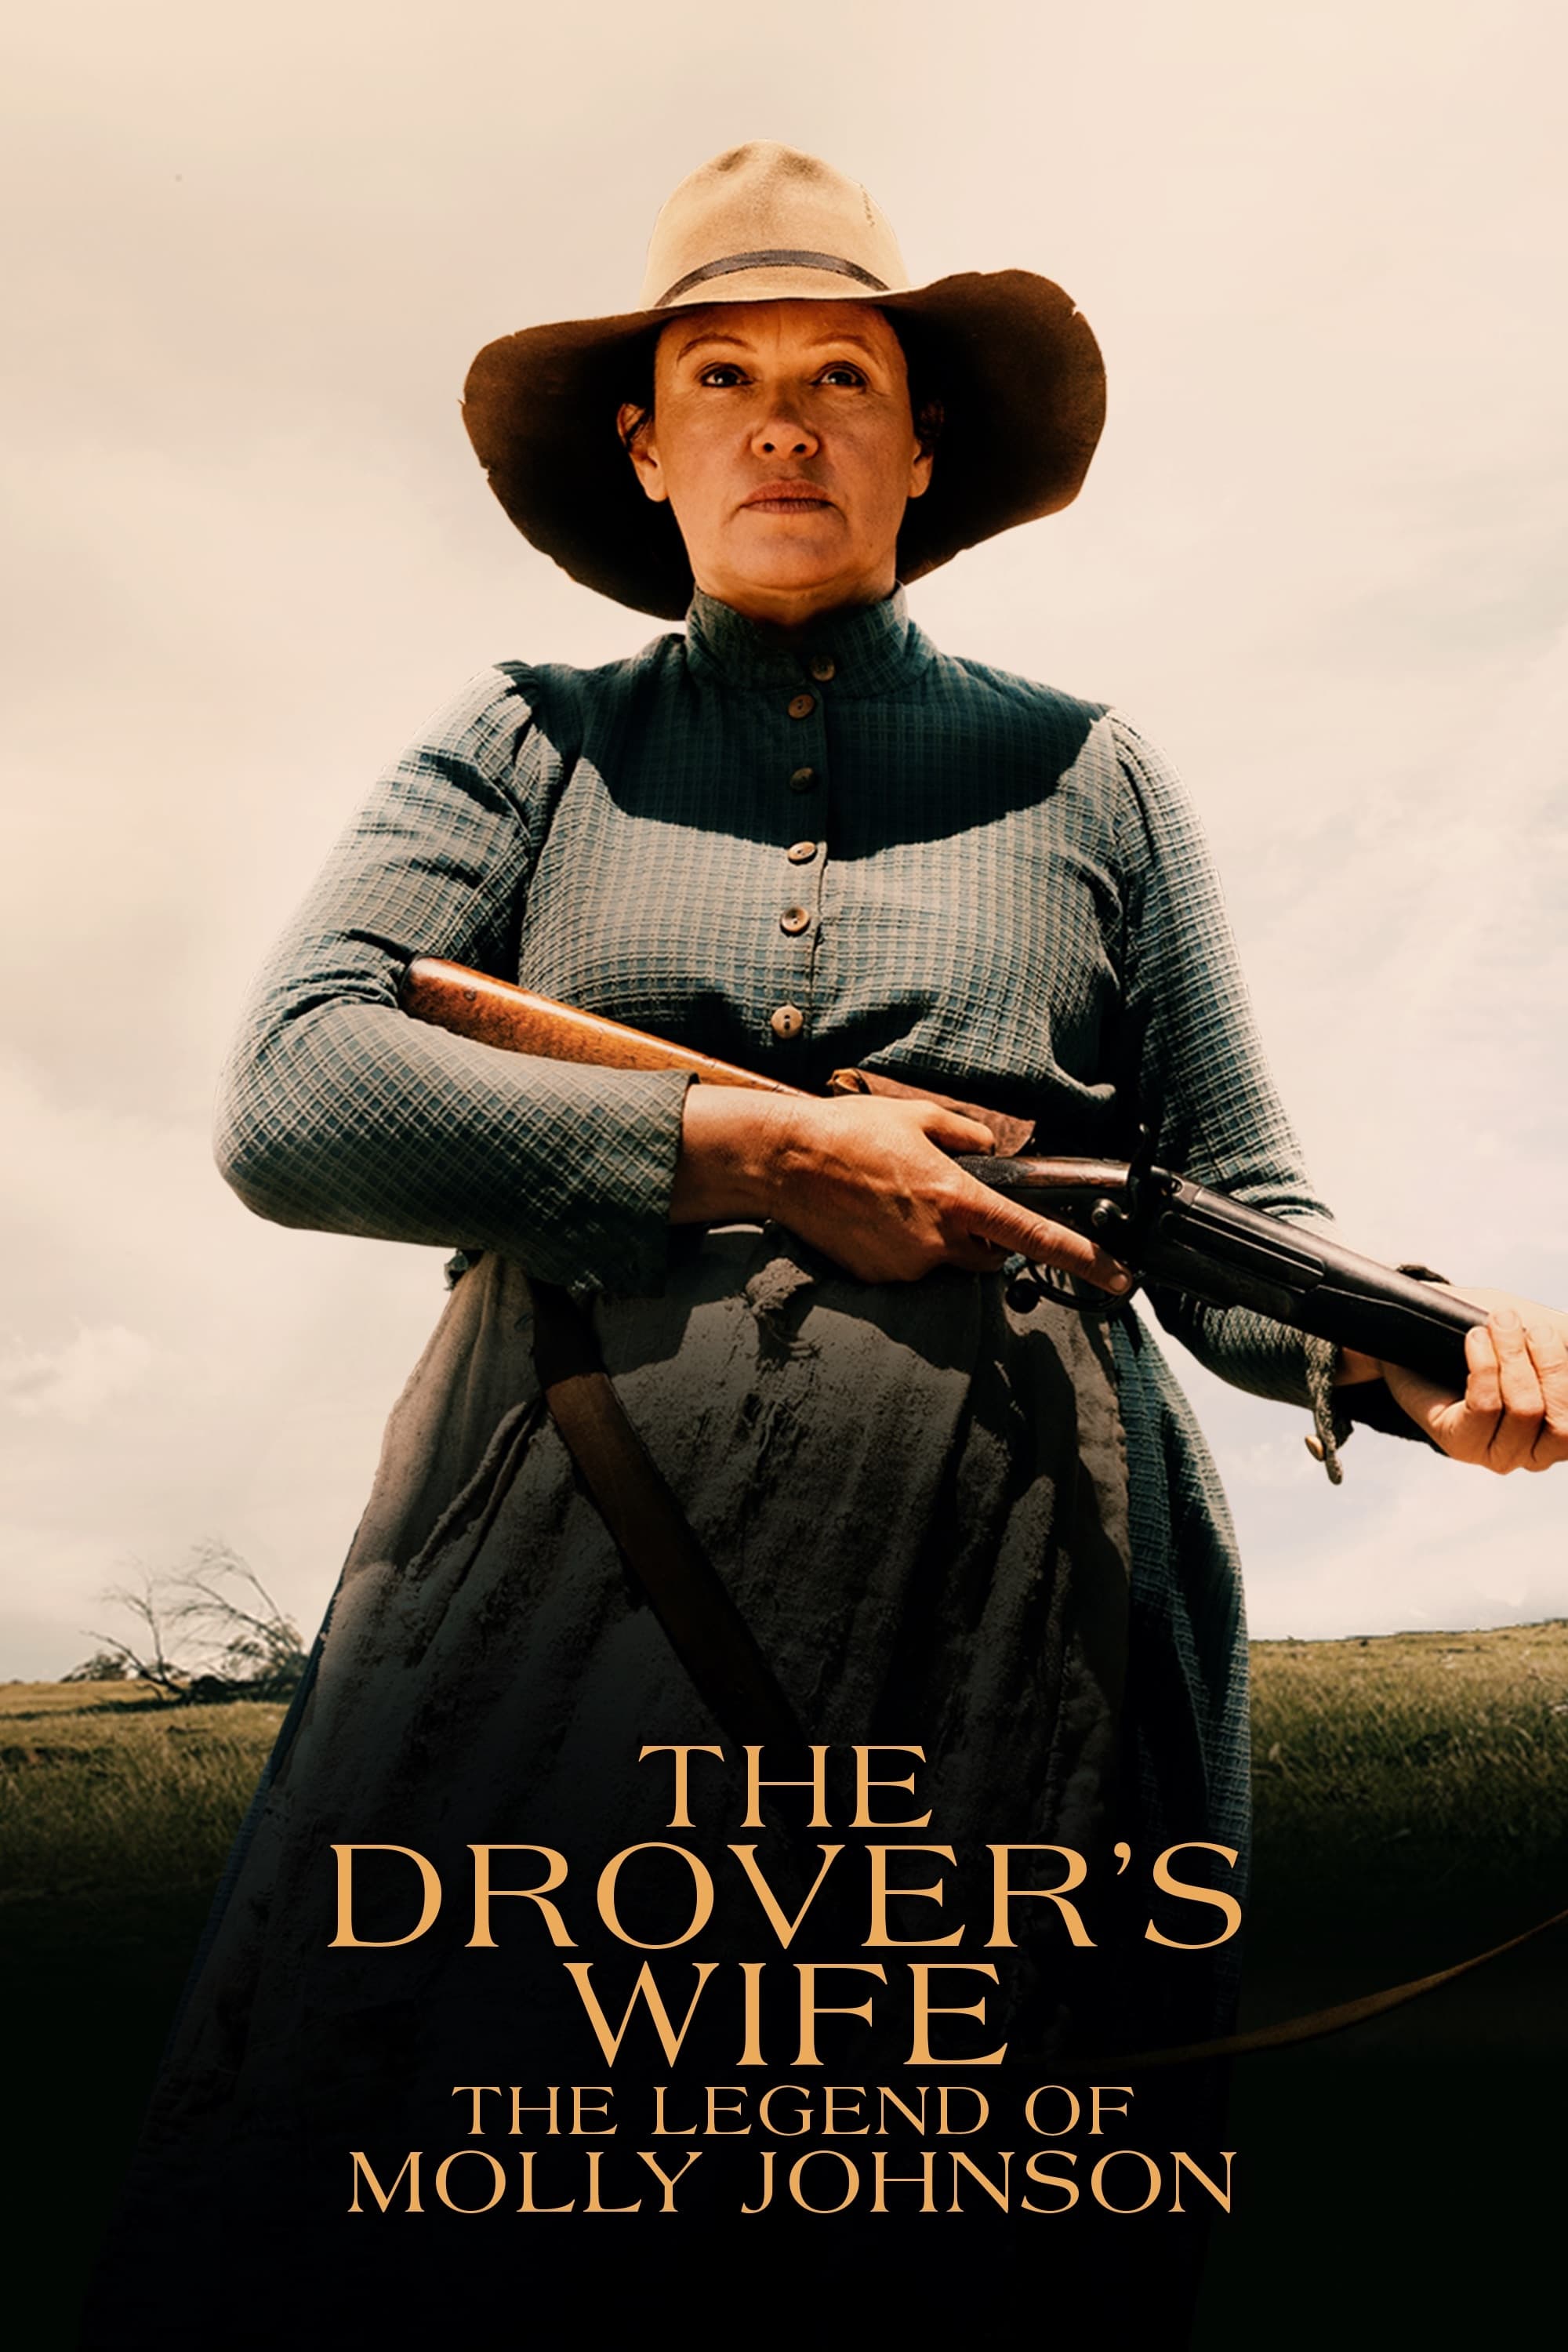 The Drover's Wife: The Legend of Molly Johnson film